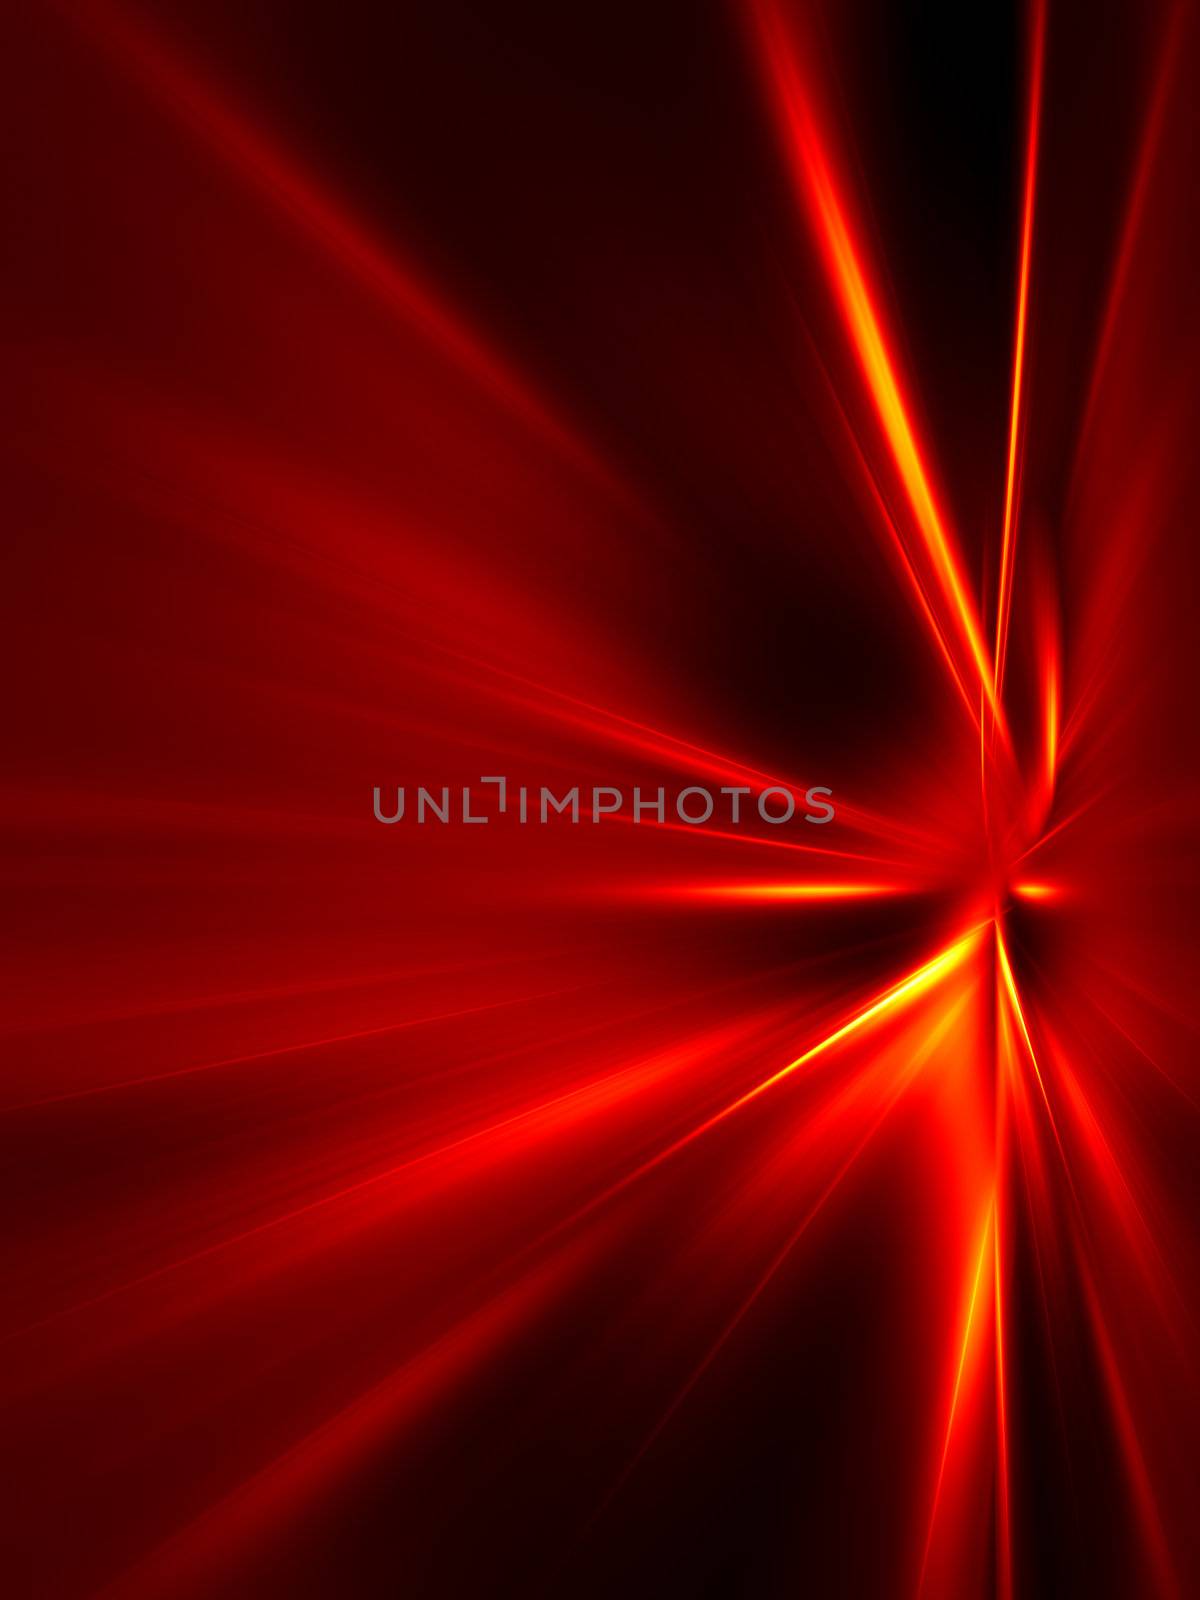 Red and yellow rays on black background. High resolution abstract image